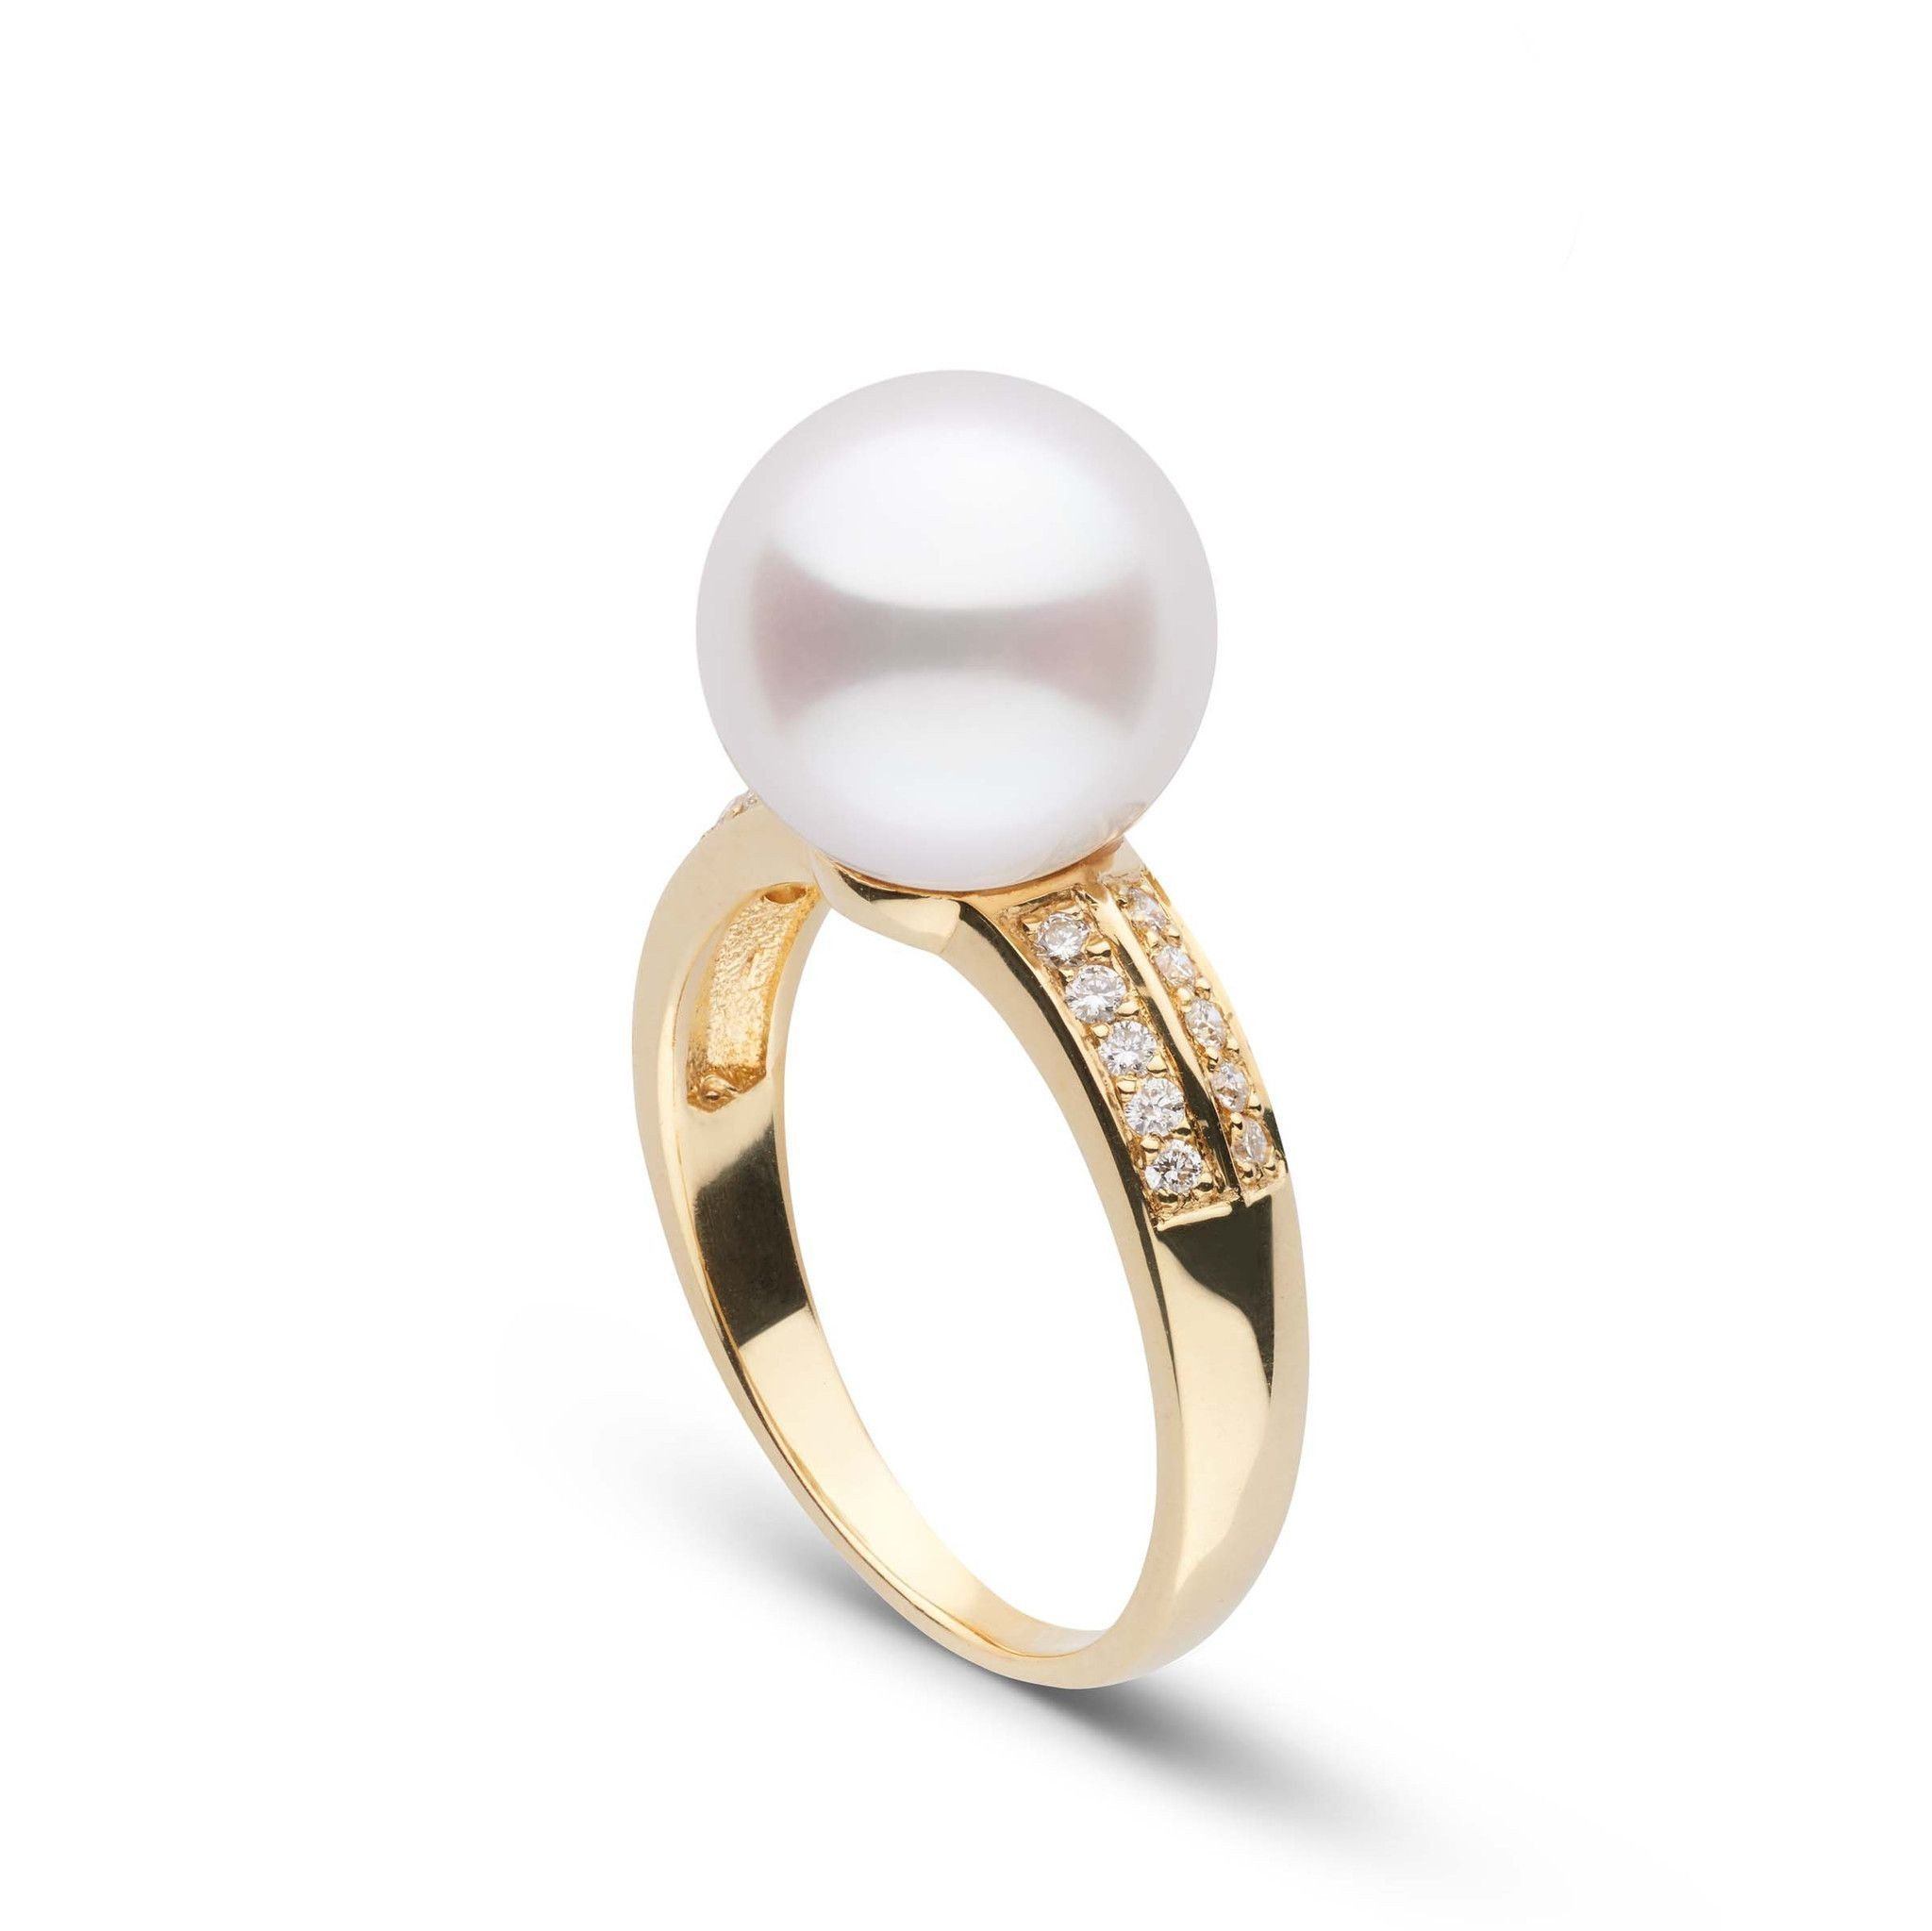 Forever Collection 10.0-11.0 mm White South Sea Pearl and Diamond Ring